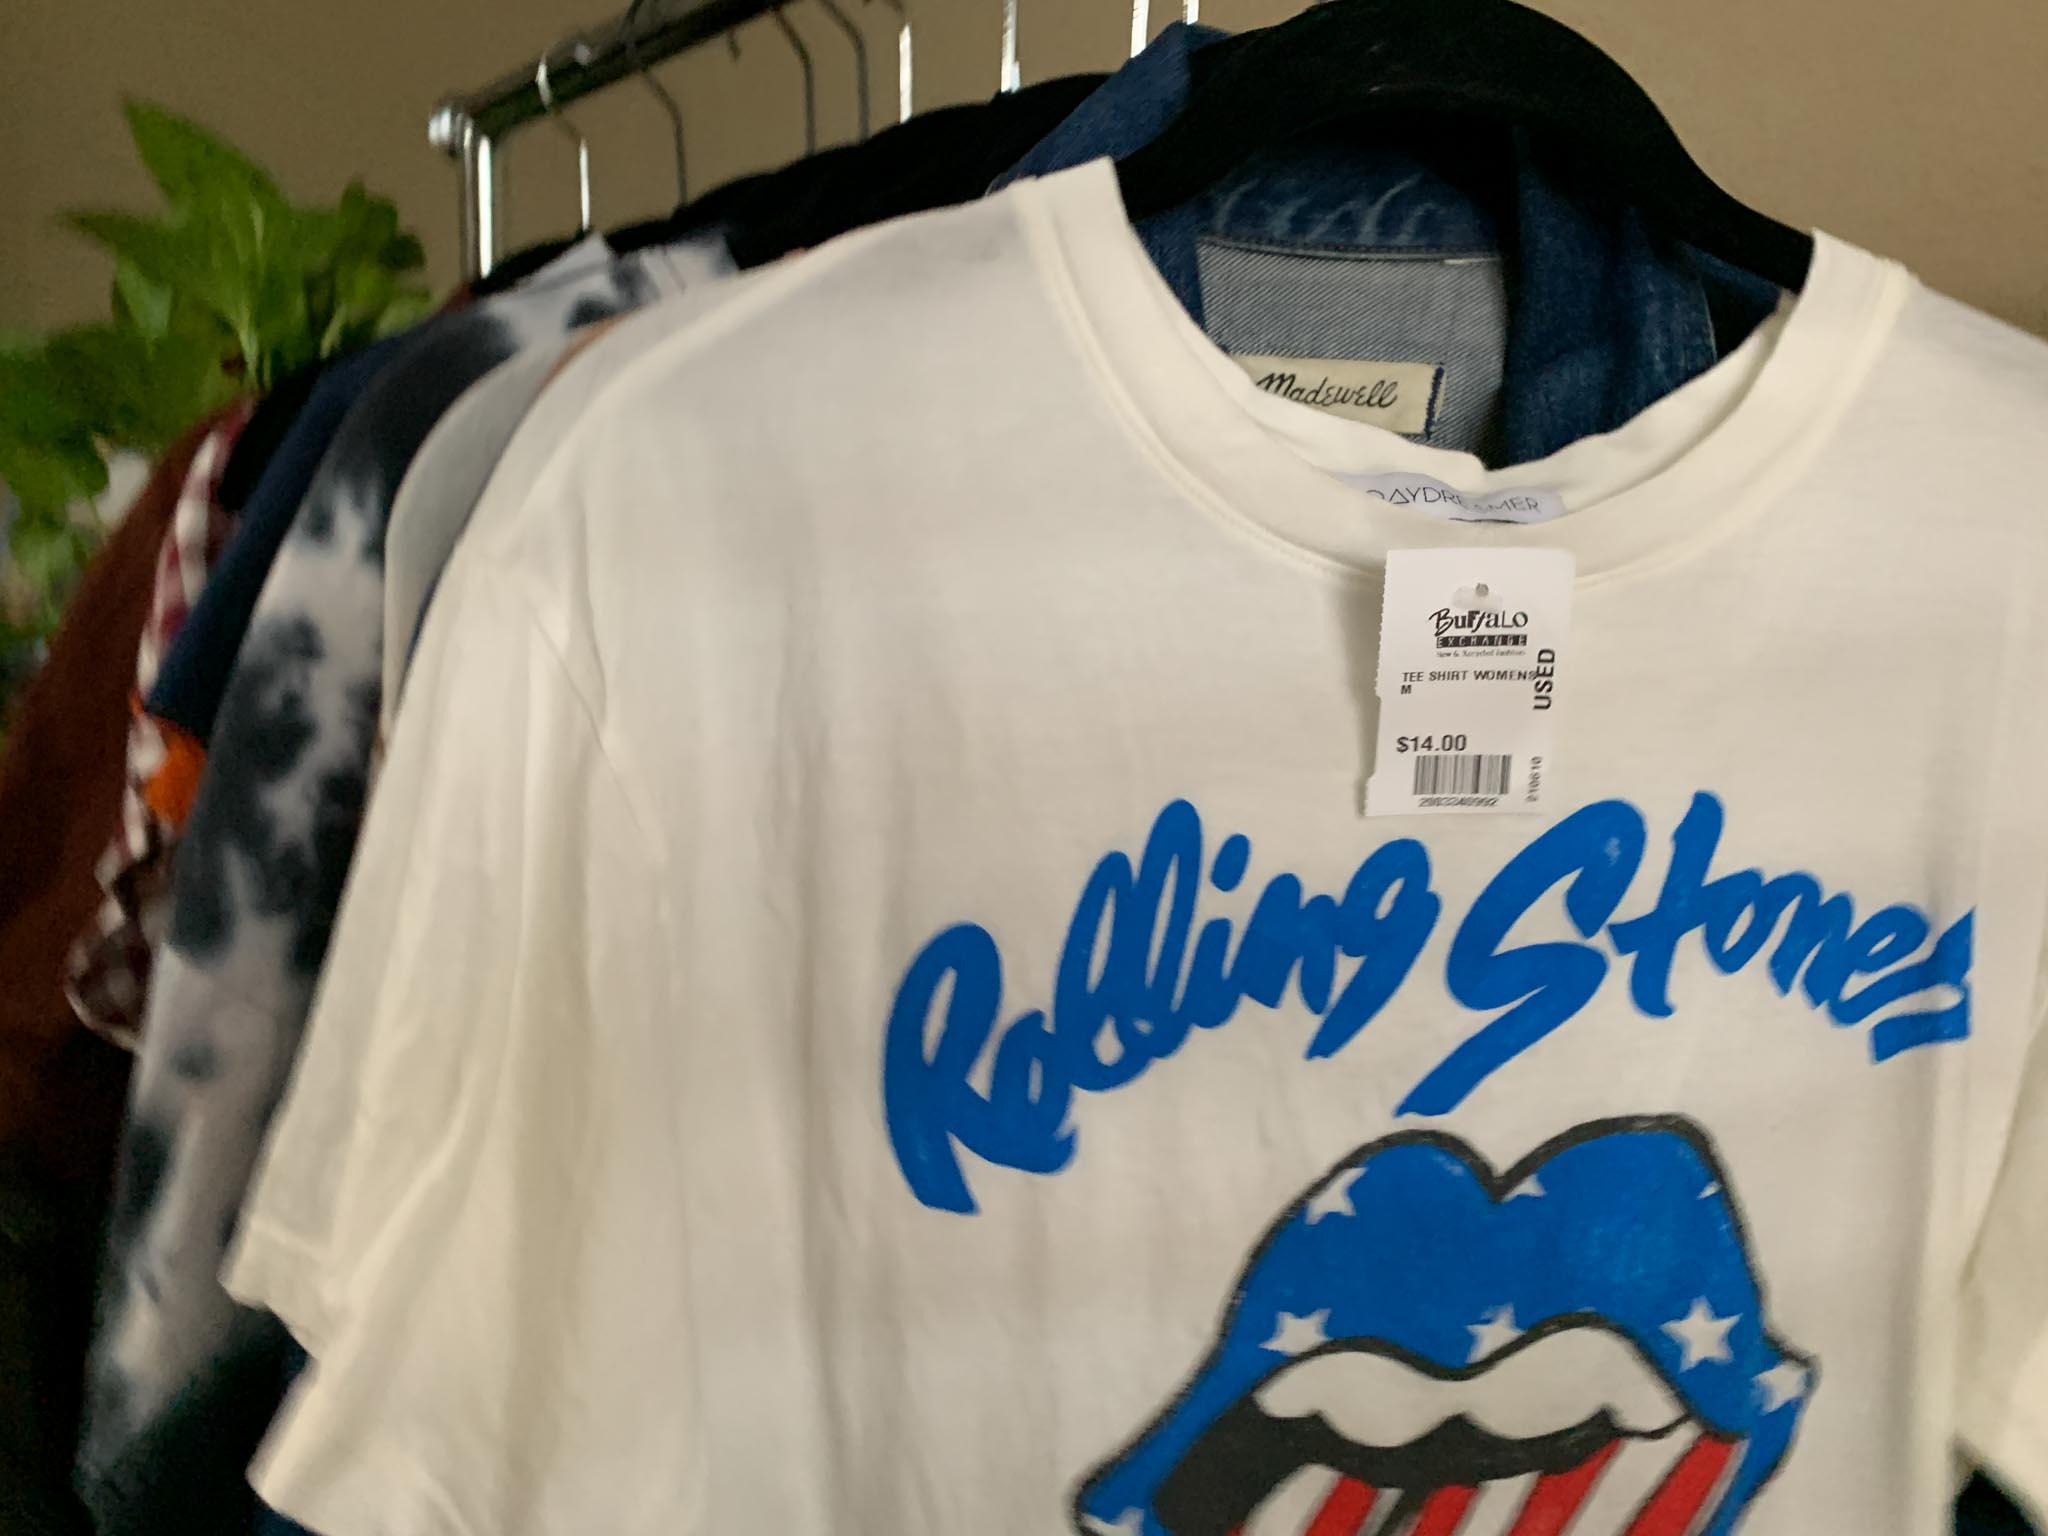 Photo of Rolling Stones T-Shirt that's brand new with tags on a clothing rack